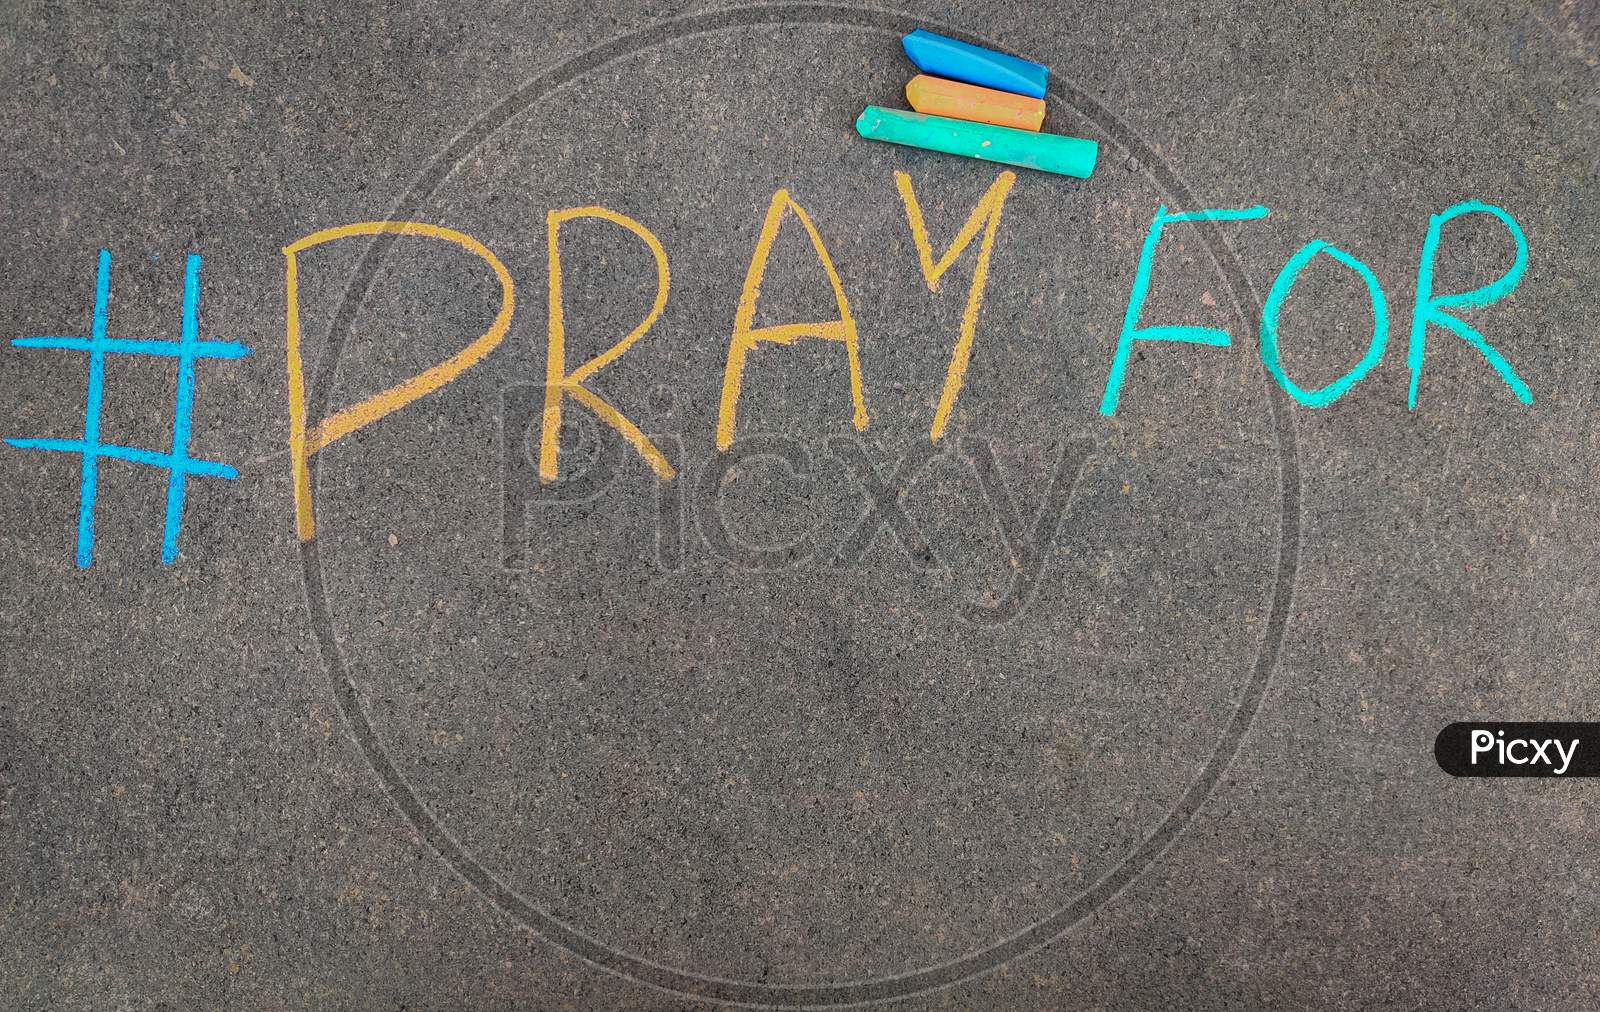 The Inscription Text On The Grey Board, #Pray For. Using Color Chalk Pieces.Copy Space